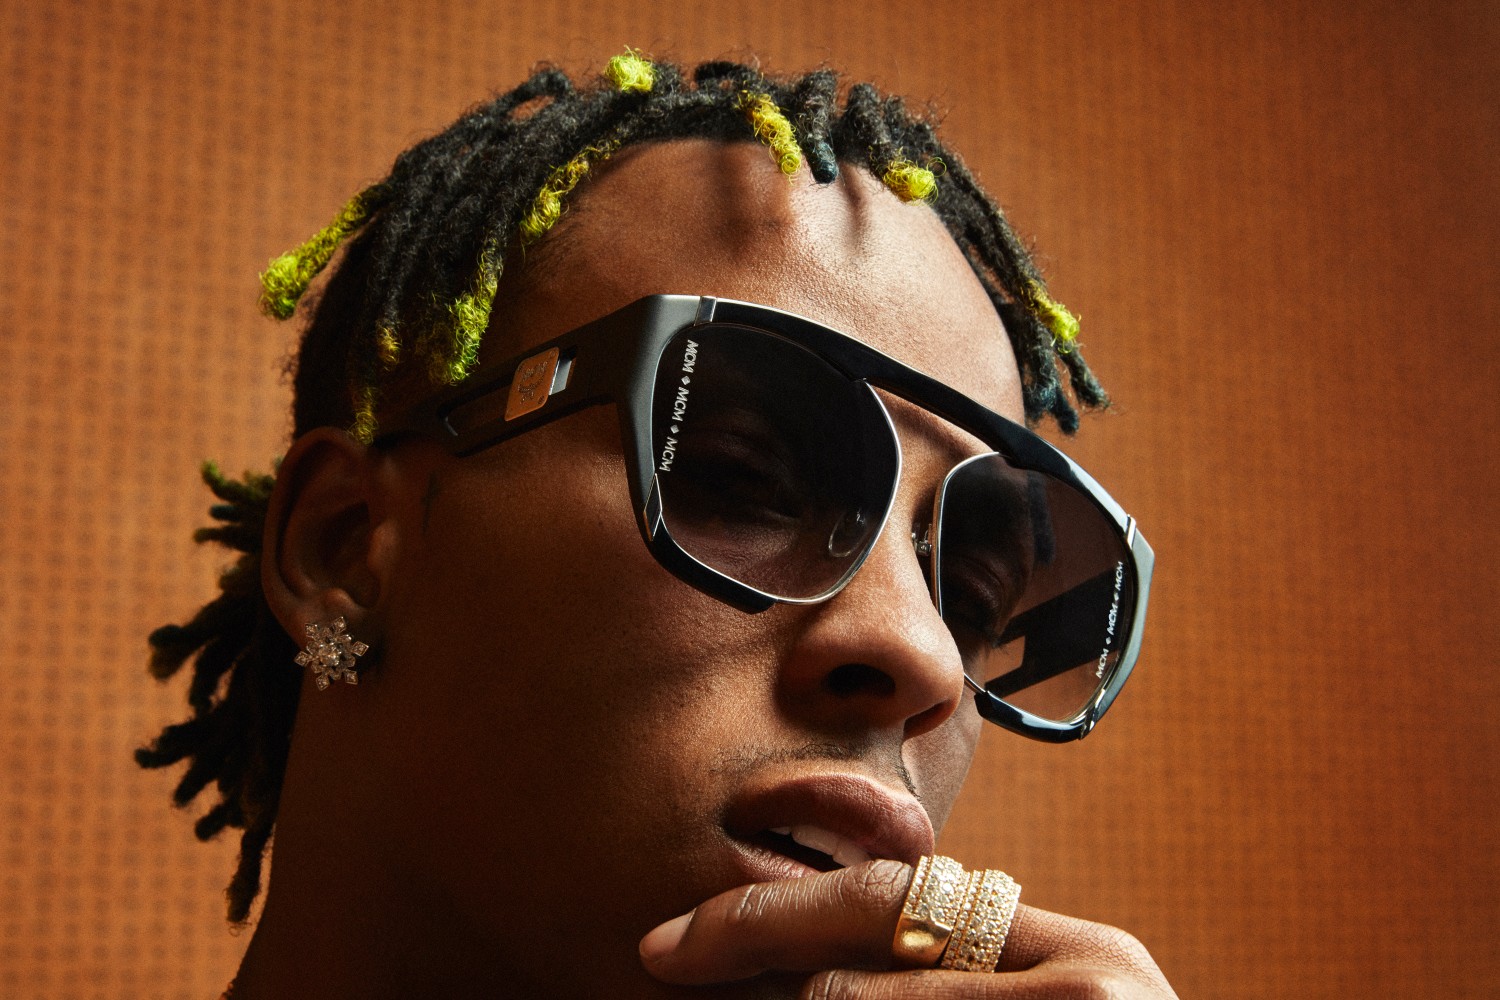 MCM Drops Hip-Hop Inspired AW18 Avatar Campaign Featuring Rich the Kid and Sita Abellan